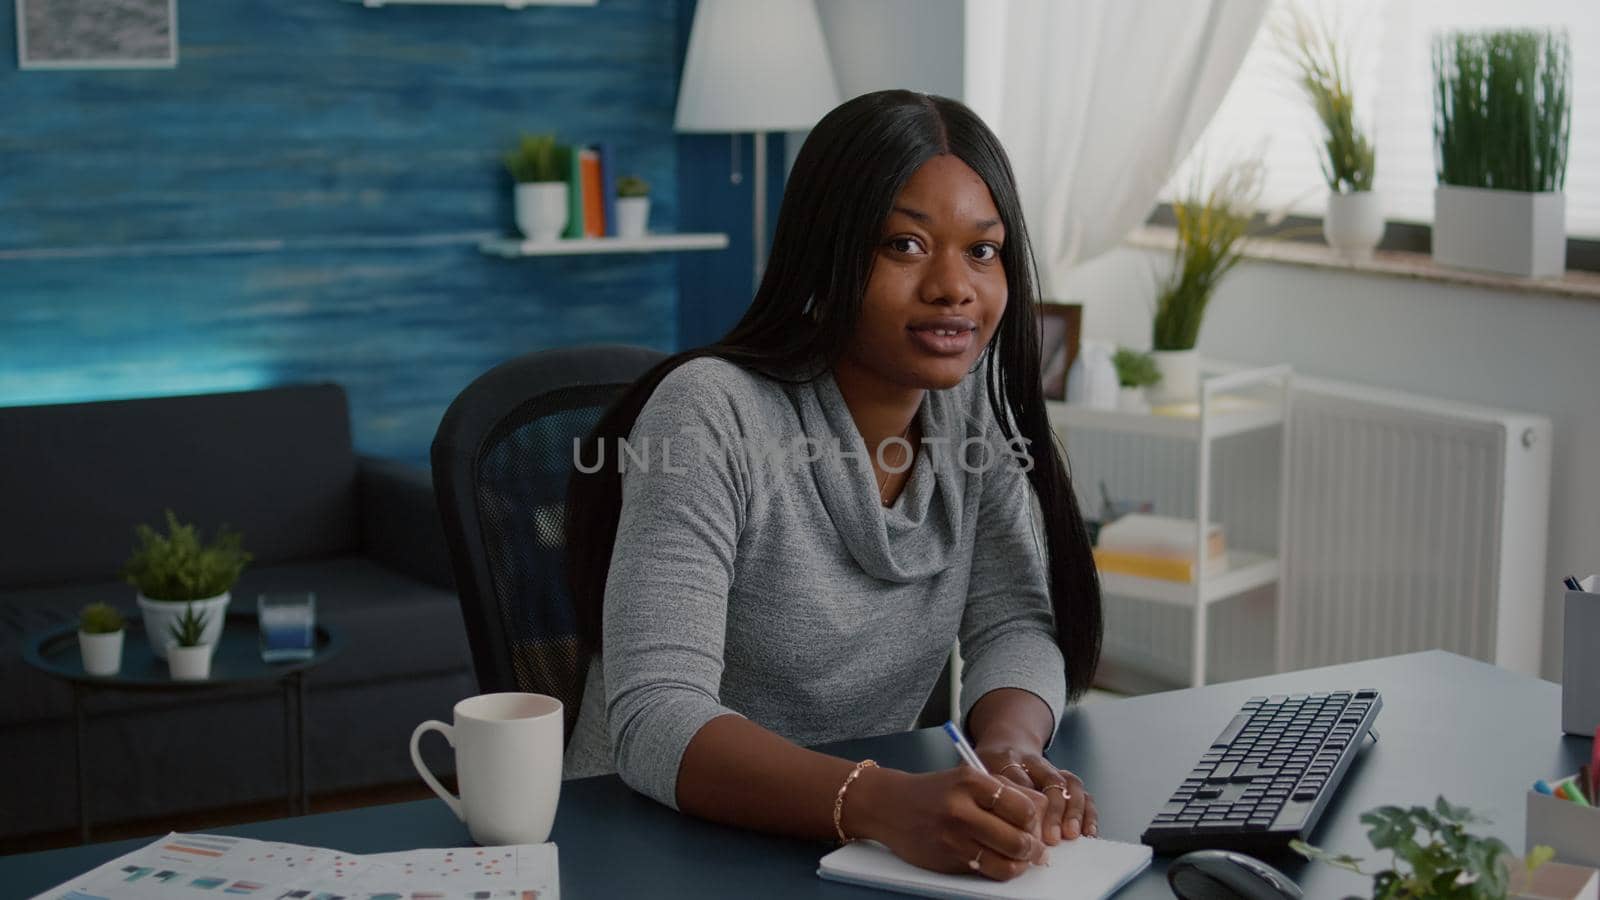 Student with black skin browsing online courses writing school homework on notebook during online webinar education. Young woman sitting at desk table in living room typing lifestyle information